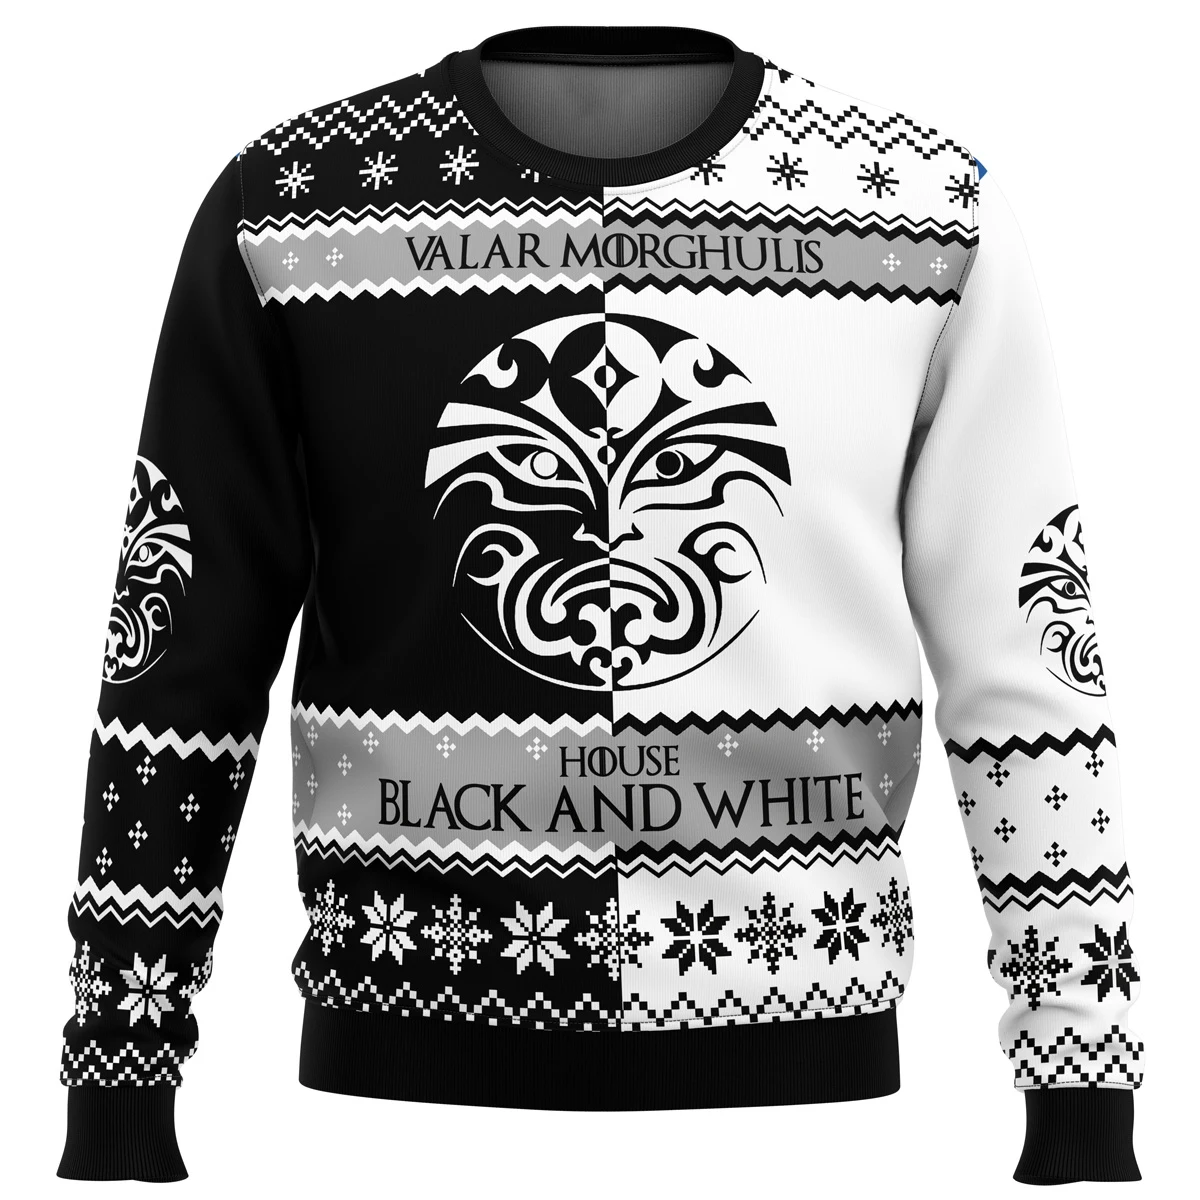 Game Of Thrones Christmas Is Coming Ugly Christmas Sweatshirt Gift Santa Claus Pullover Autumn Winter Men 4 - Game Of Thrones Shop